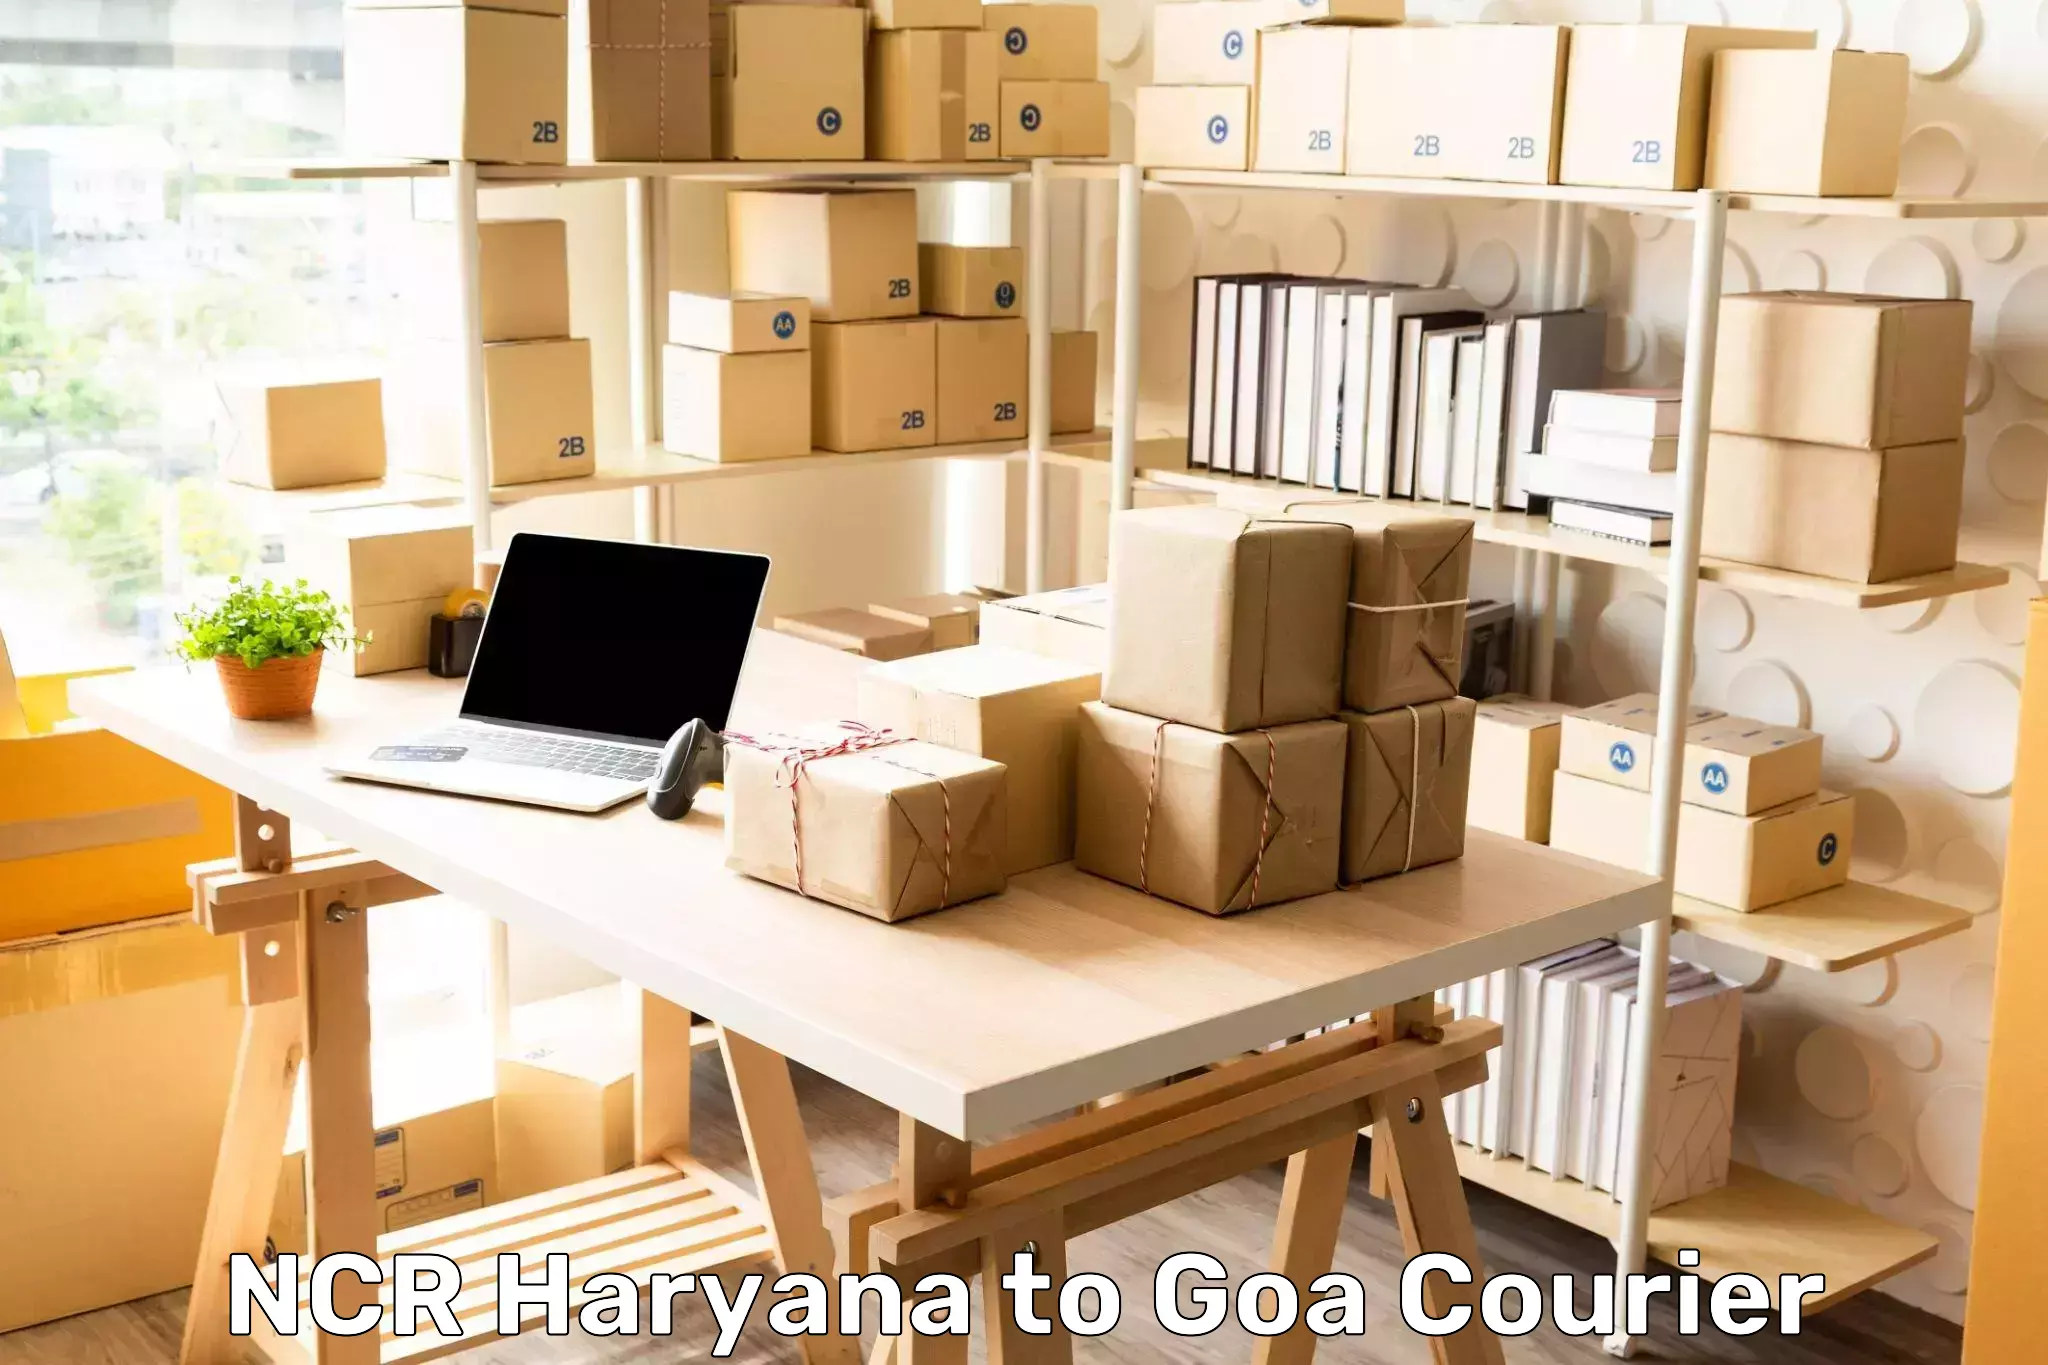 Reliable parcel services NCR Haryana to Panjim